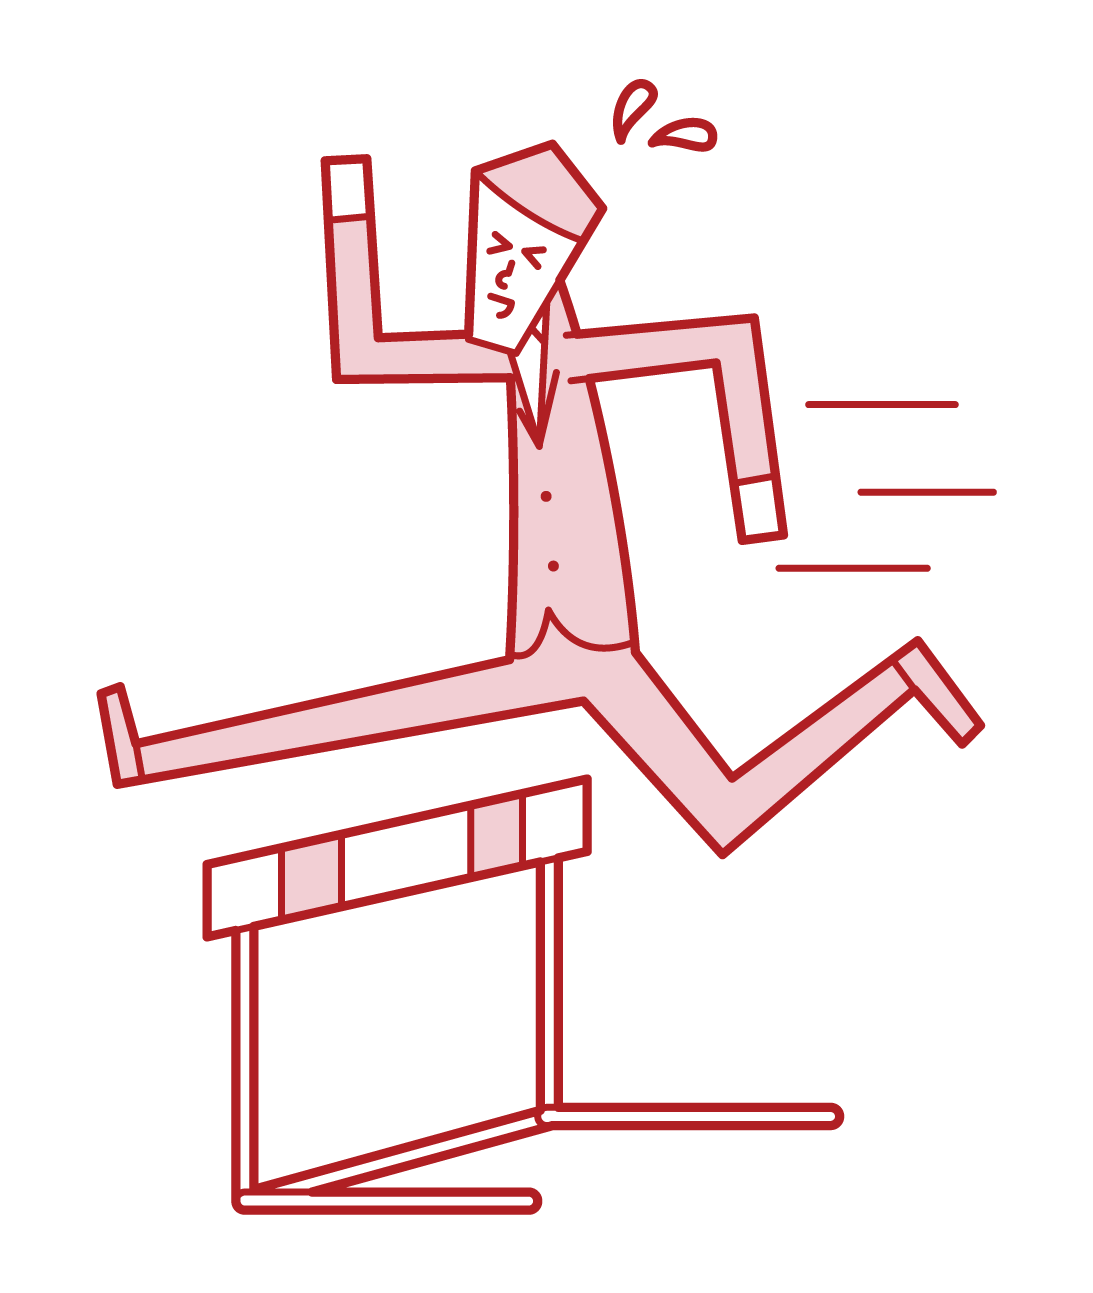 Illustration of a person (male) jumping over a hurdle